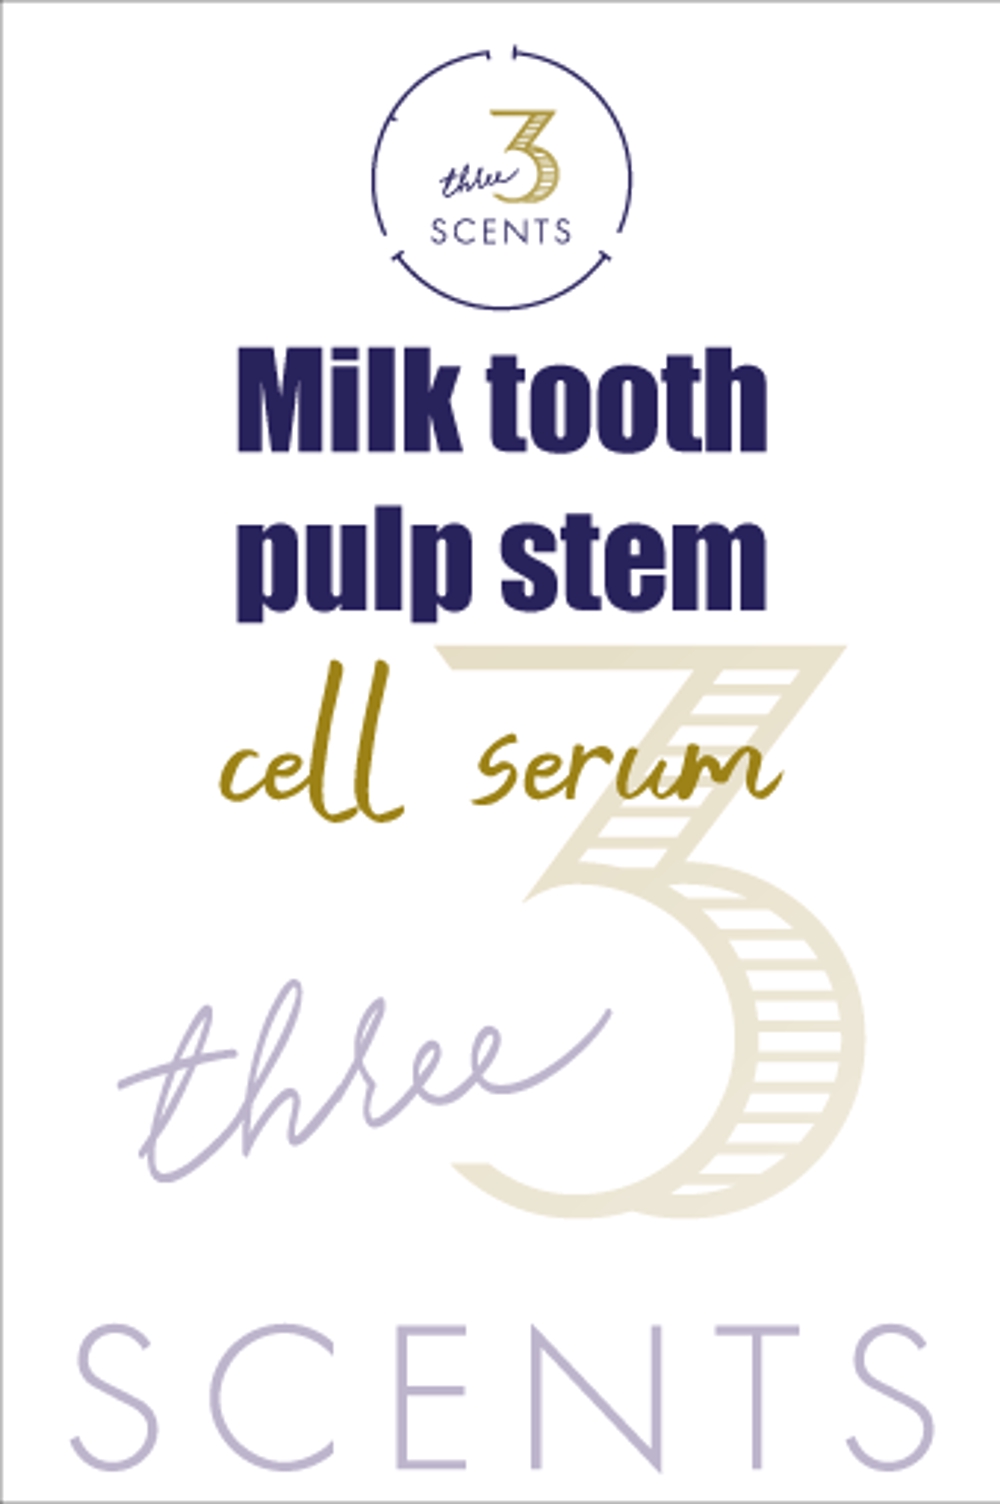 label-３scents-Serum01.png